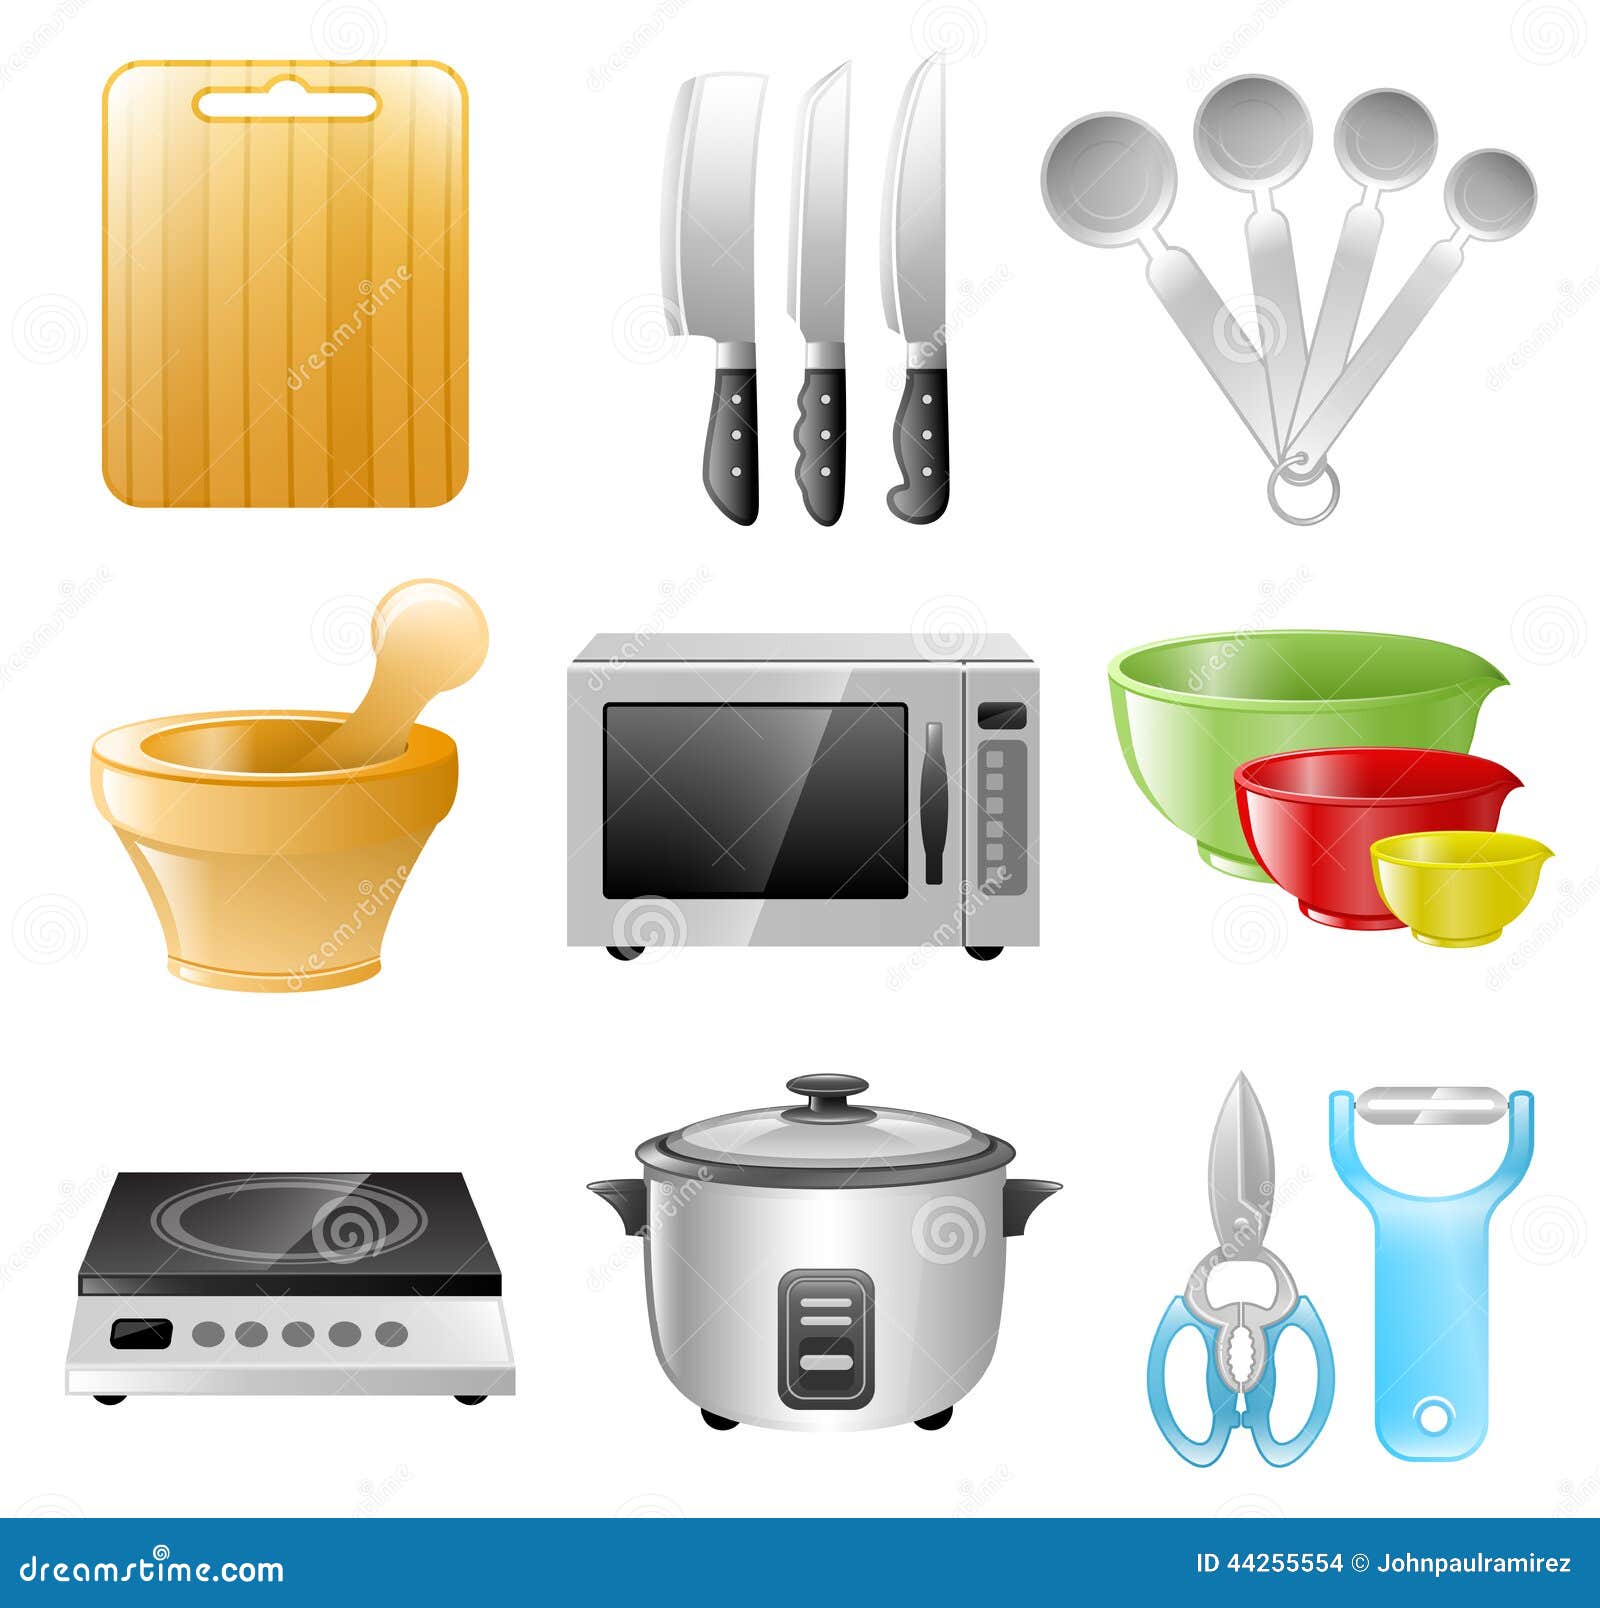 cooking supplies clipart - photo #34